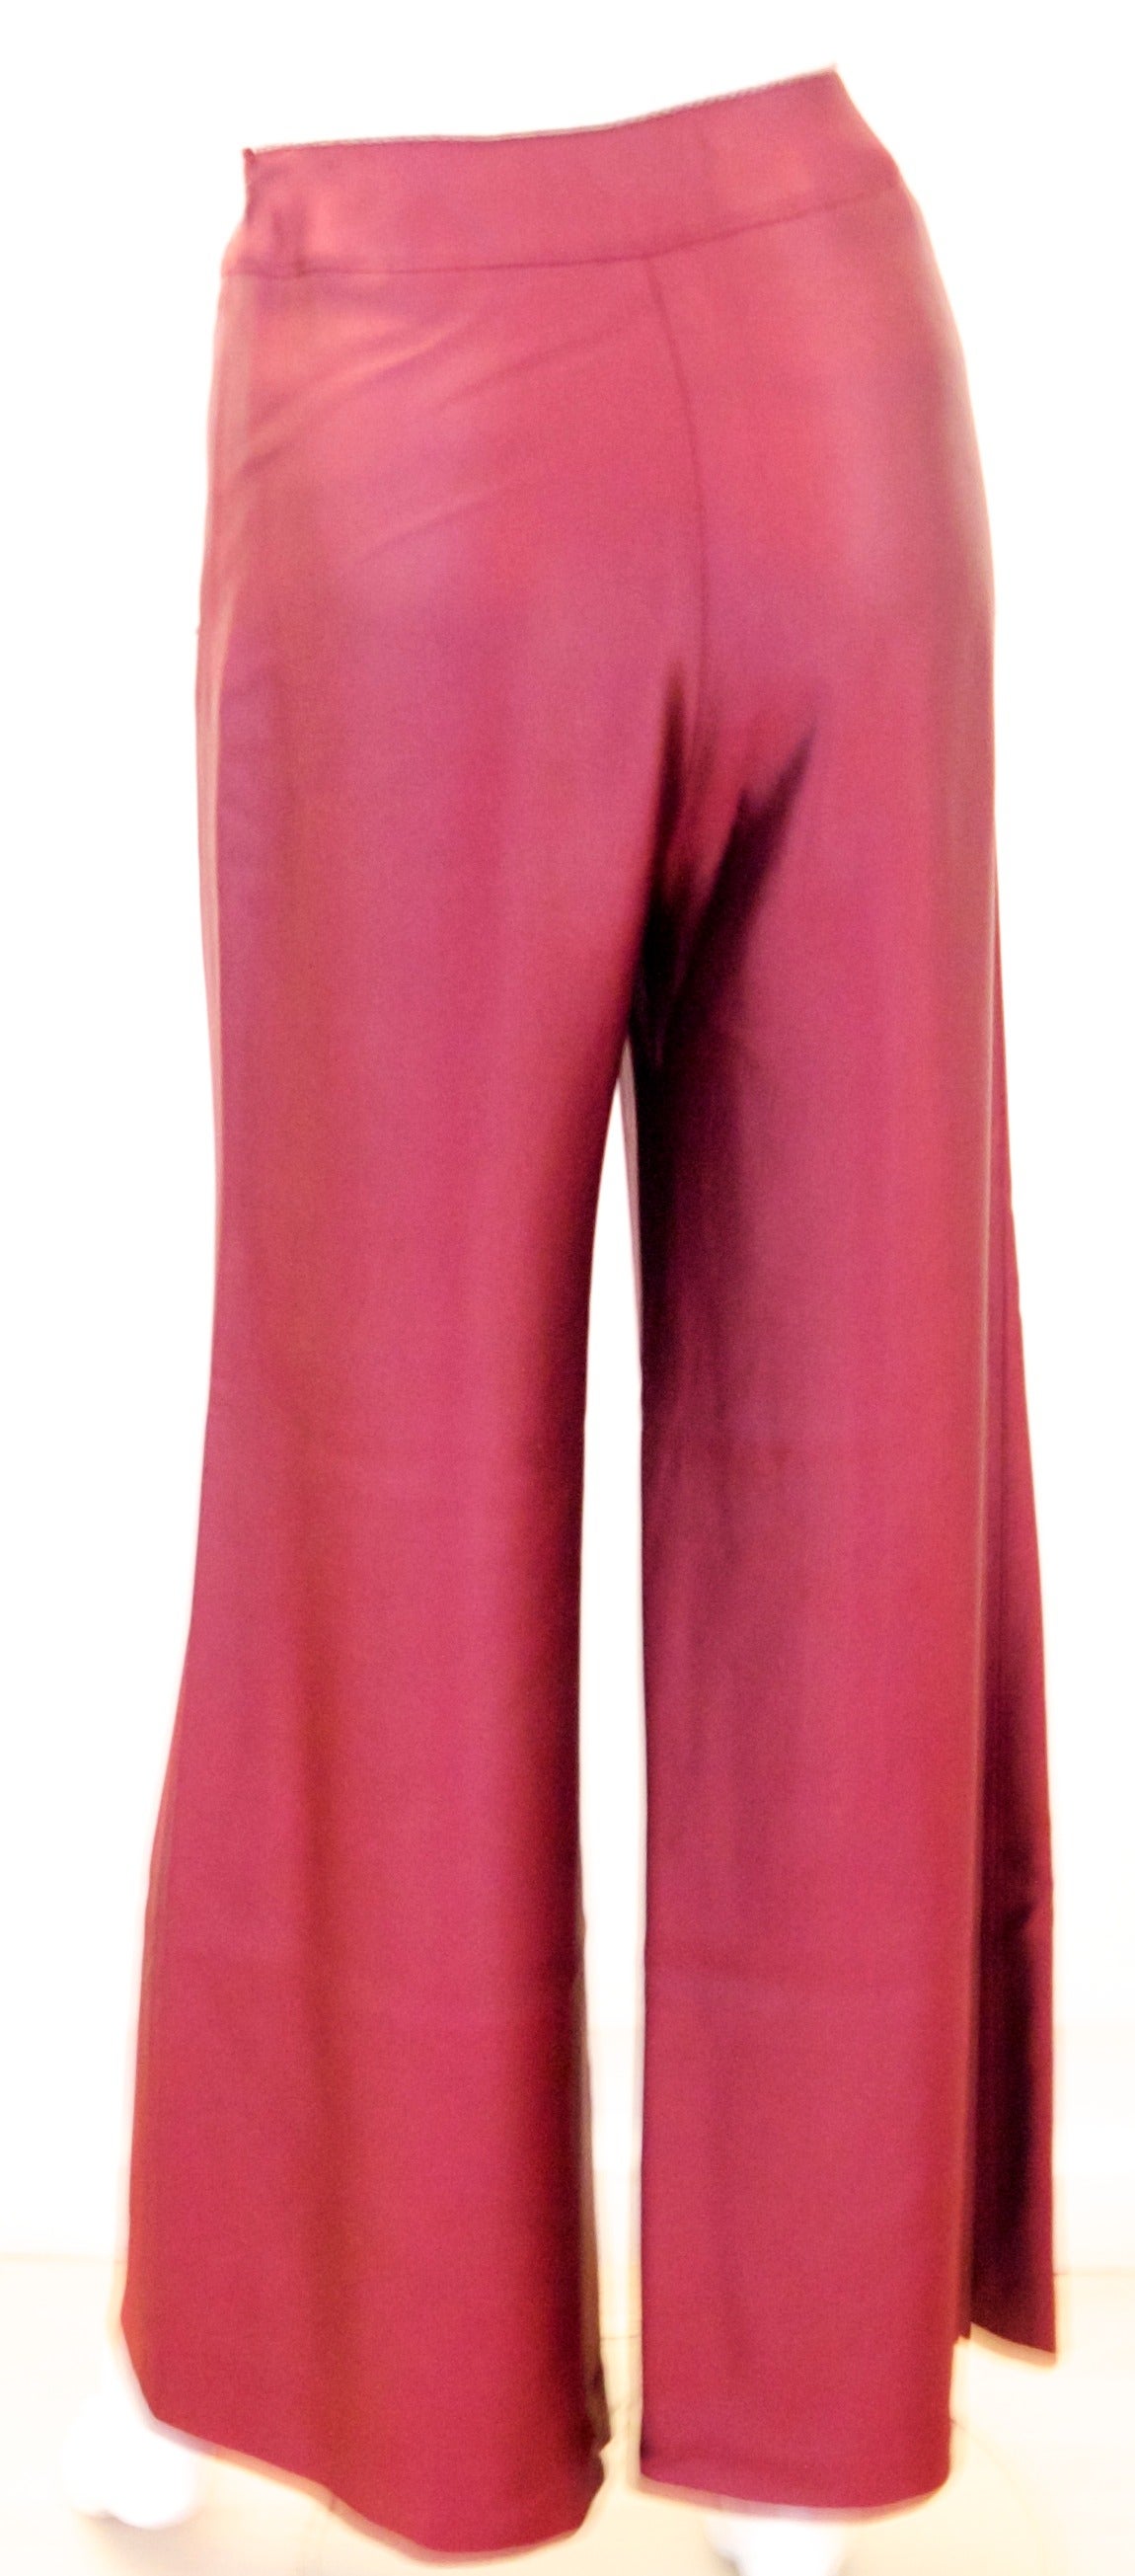 Chanel burgundy cocktail pants. Size 34. This beautiful pair of burgundy Chanel pants are perfect for a cocktail party. The fabric is a beautiful heavy silk lined feeling and flow naturally and beautifully on the body. The pants comprise a silver